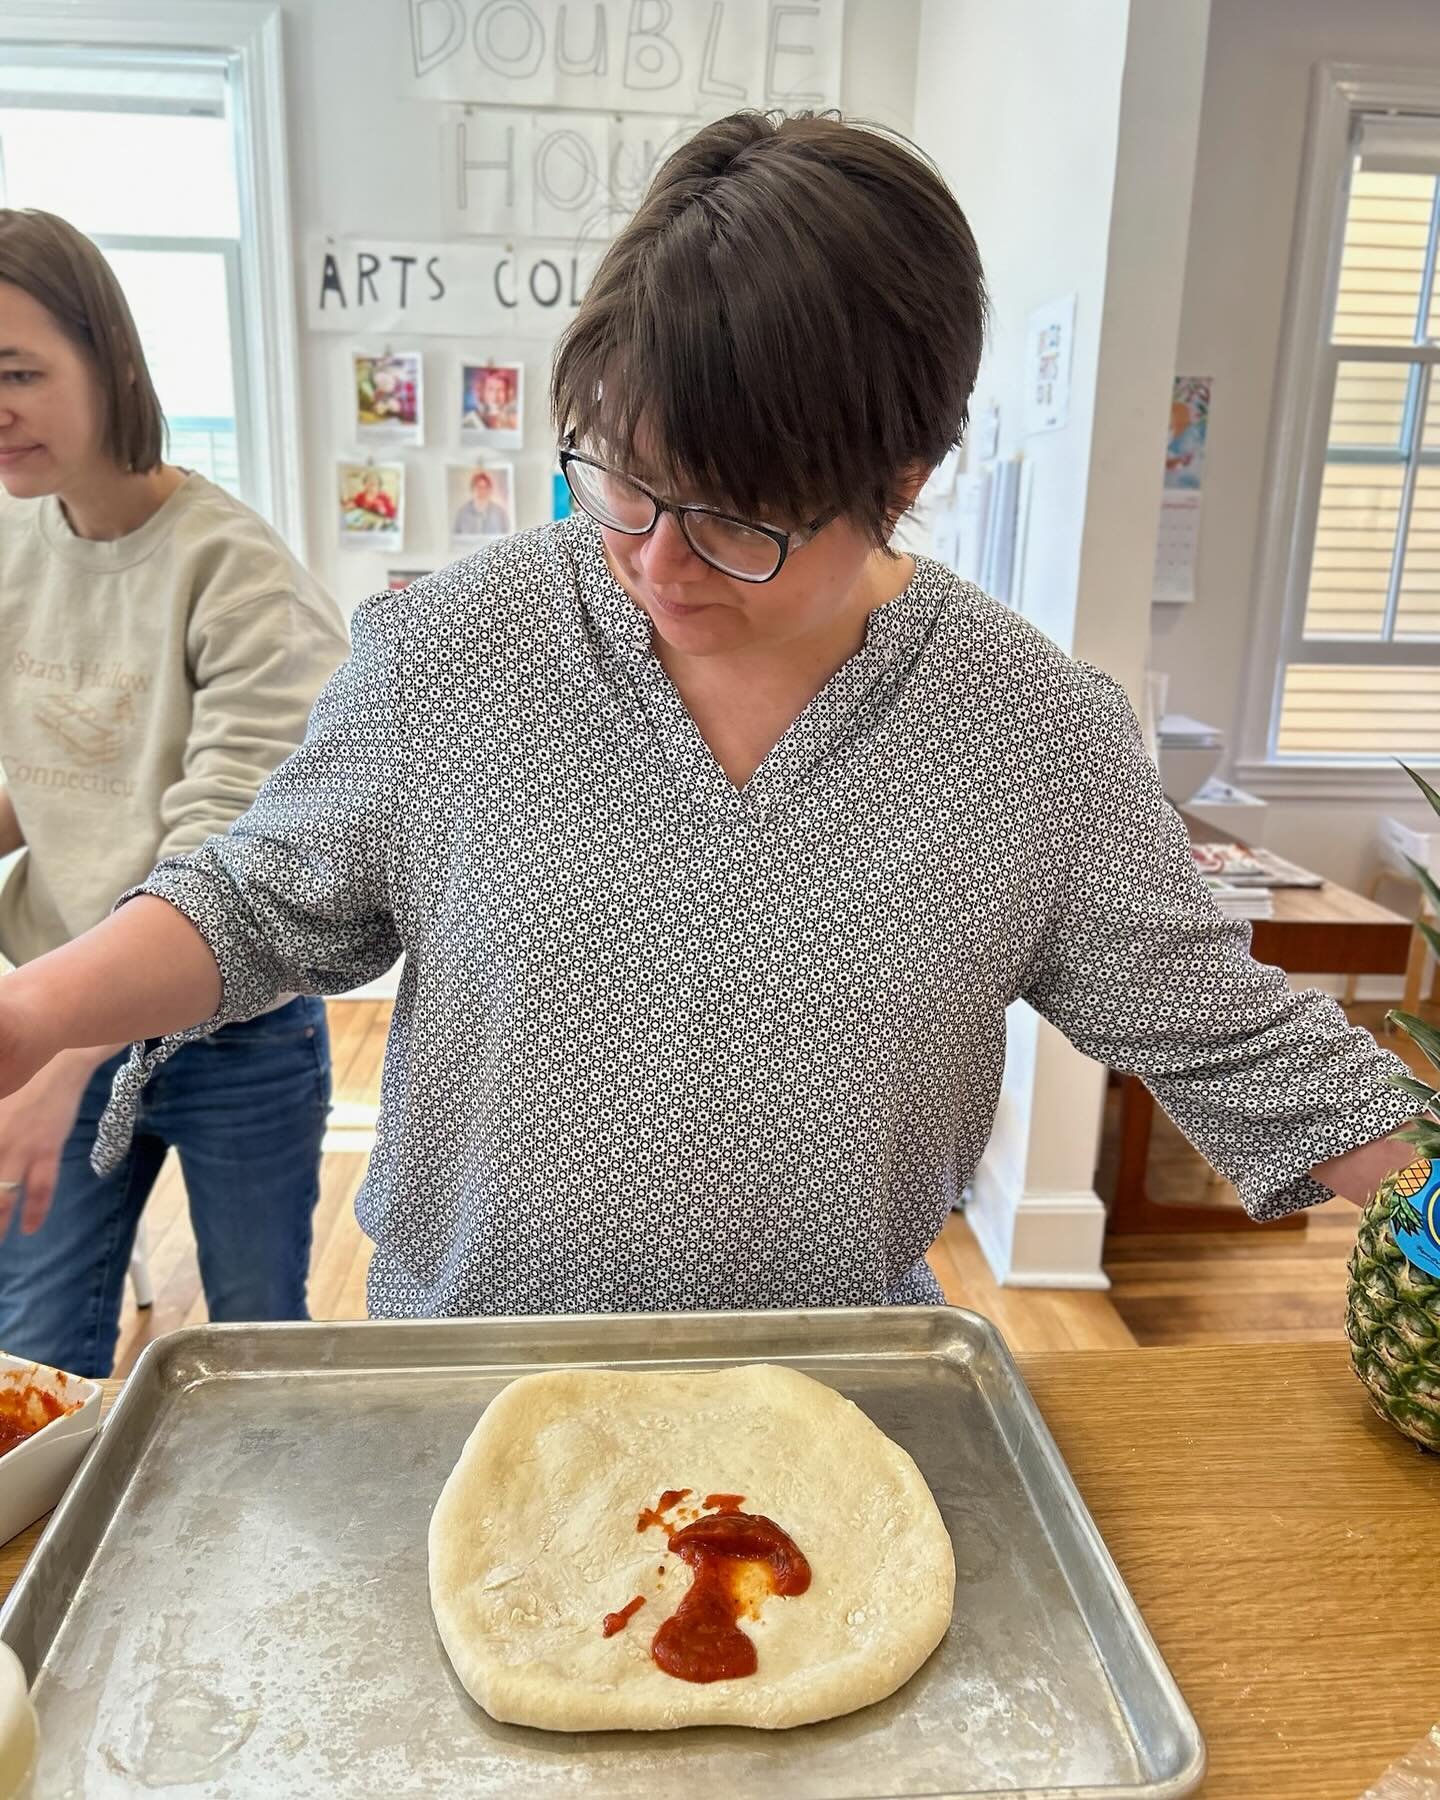 🍕 Pizza Art Workshop with Janet! 🍕 
@inkspotmojo @doublehouseartscollective 

Image Description: first photo, Janine putting sauce on pizza dough. Second photo, Janet and John making pizza. Third photo, Eben holding his pizza creation. Fourth and F